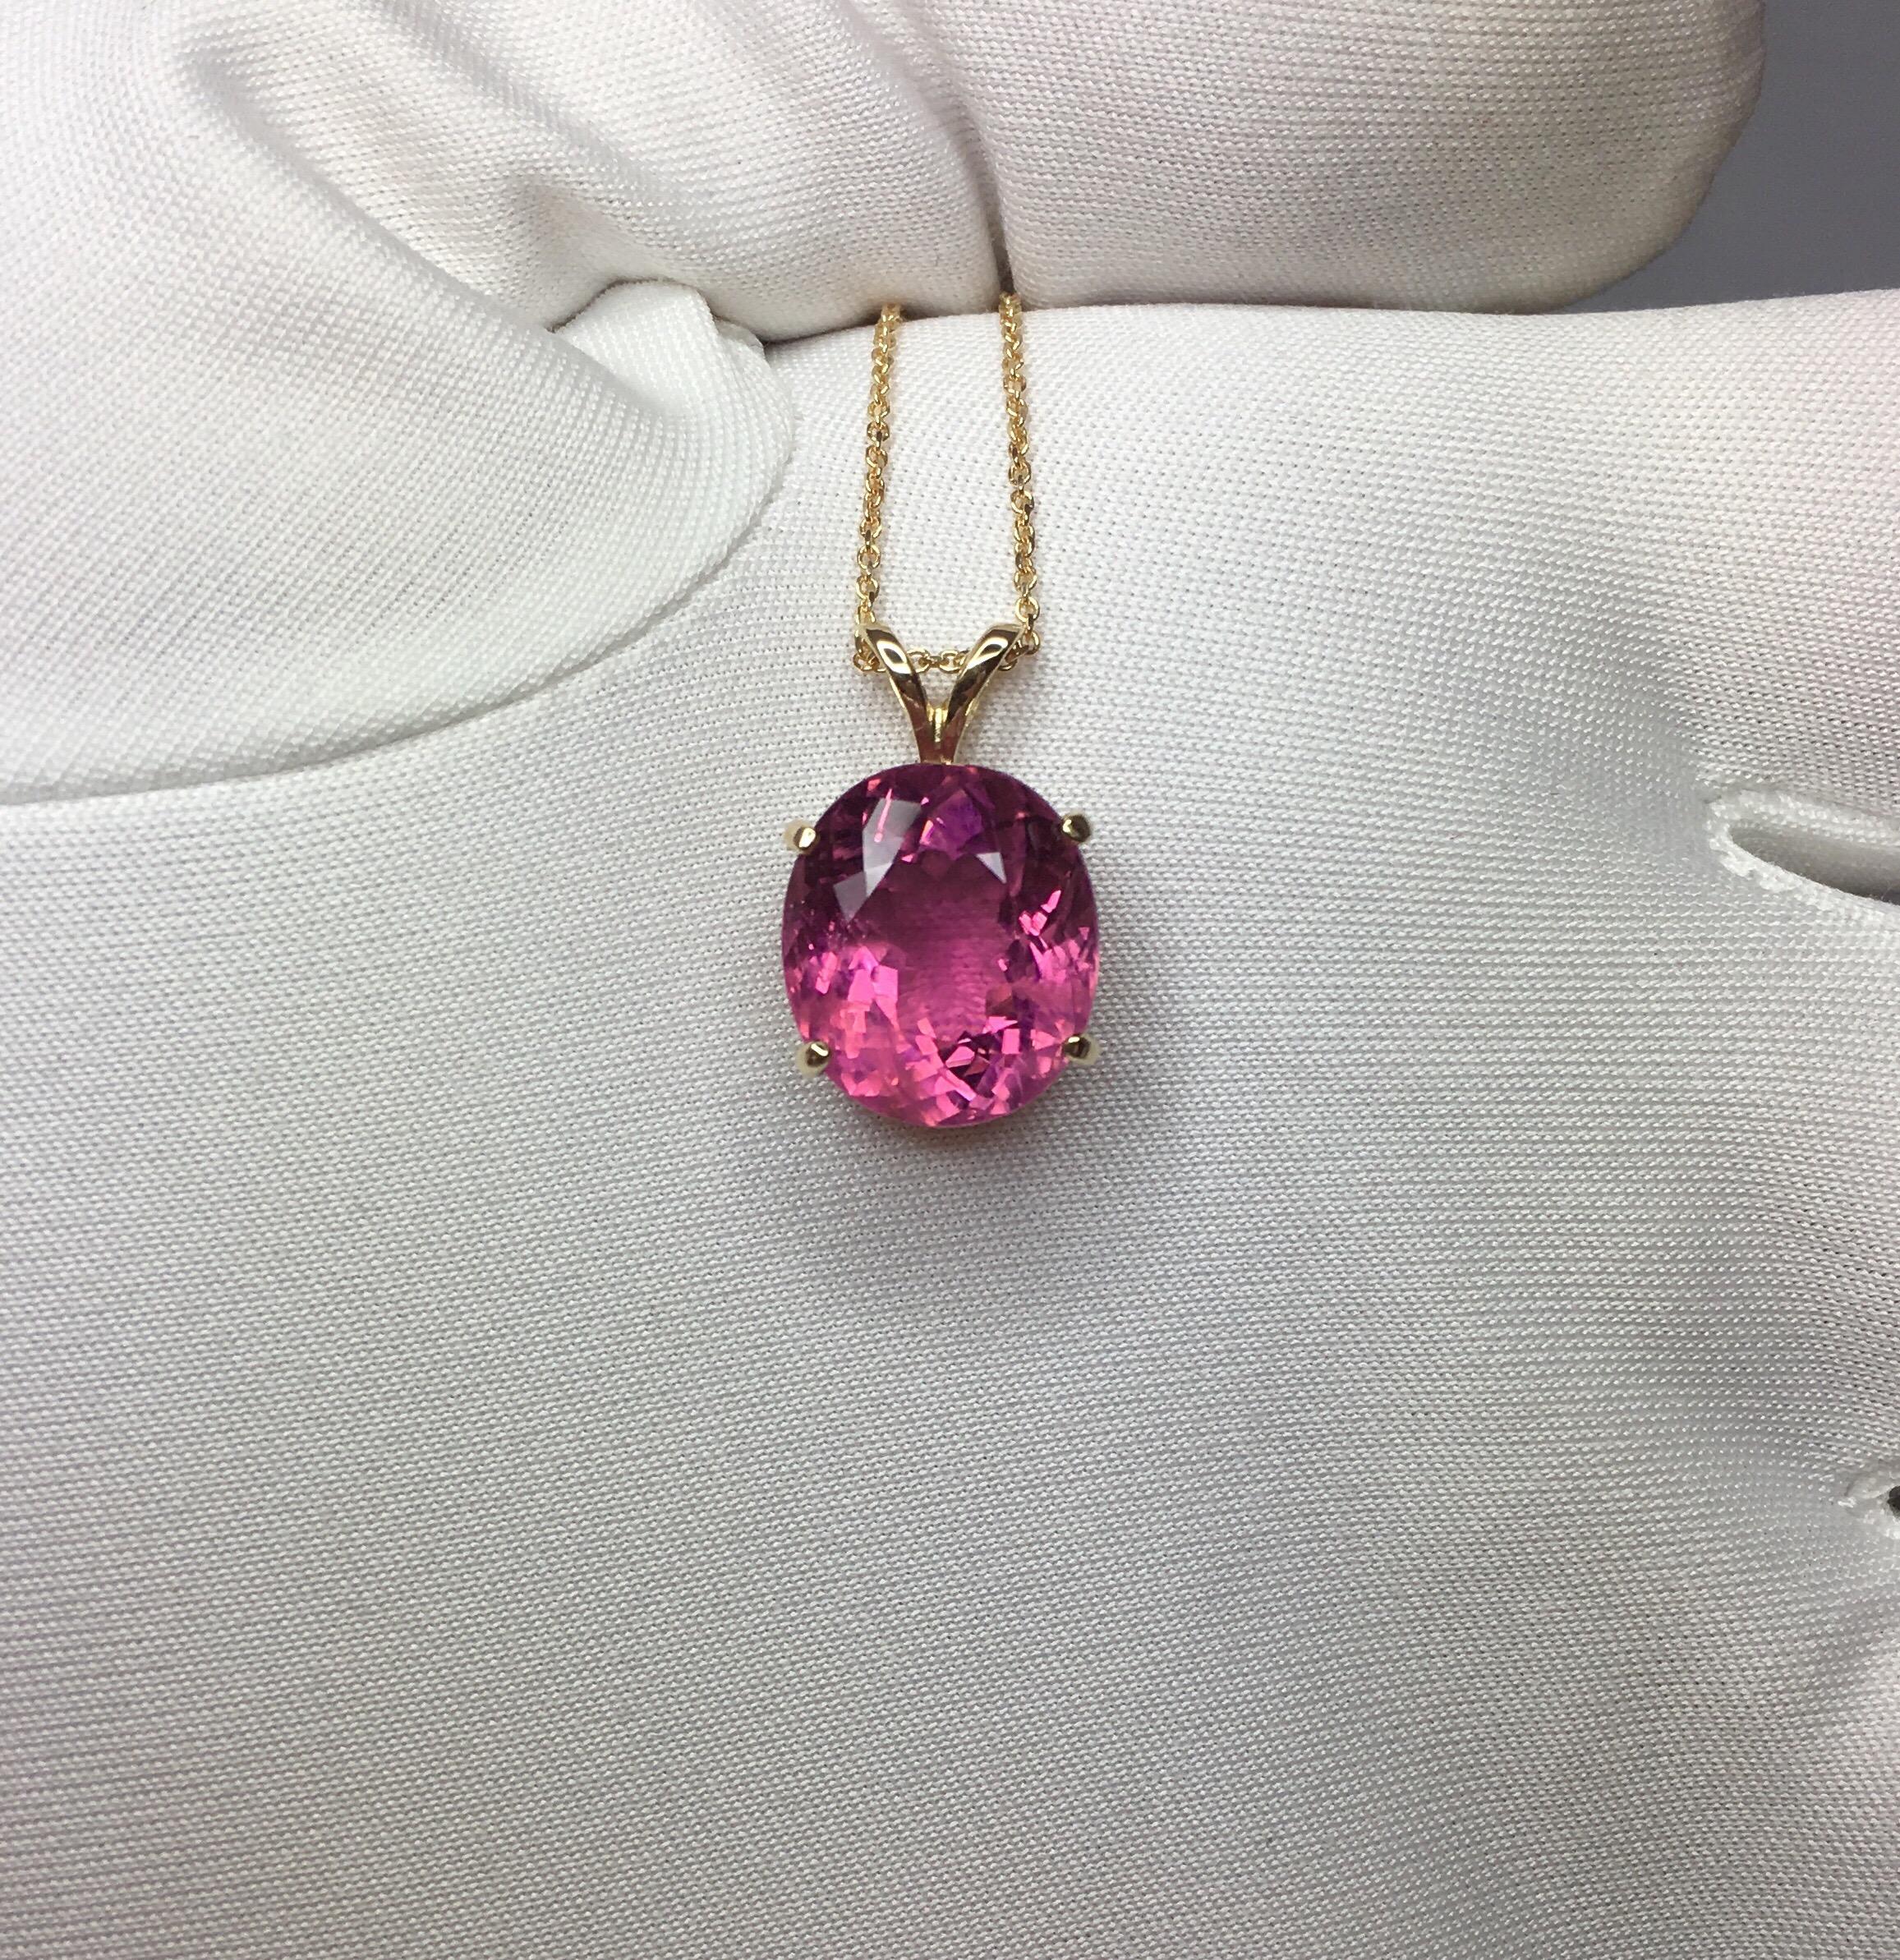 Beautiful large natural 6.10 carat vivid pink Rubellite tourmaline set in a fine 14k yellow gold solitaire pendant.

Stunning tourmaline with a vivid pink colour and good clarity, some inclusions when looking closely, as to be expected with a